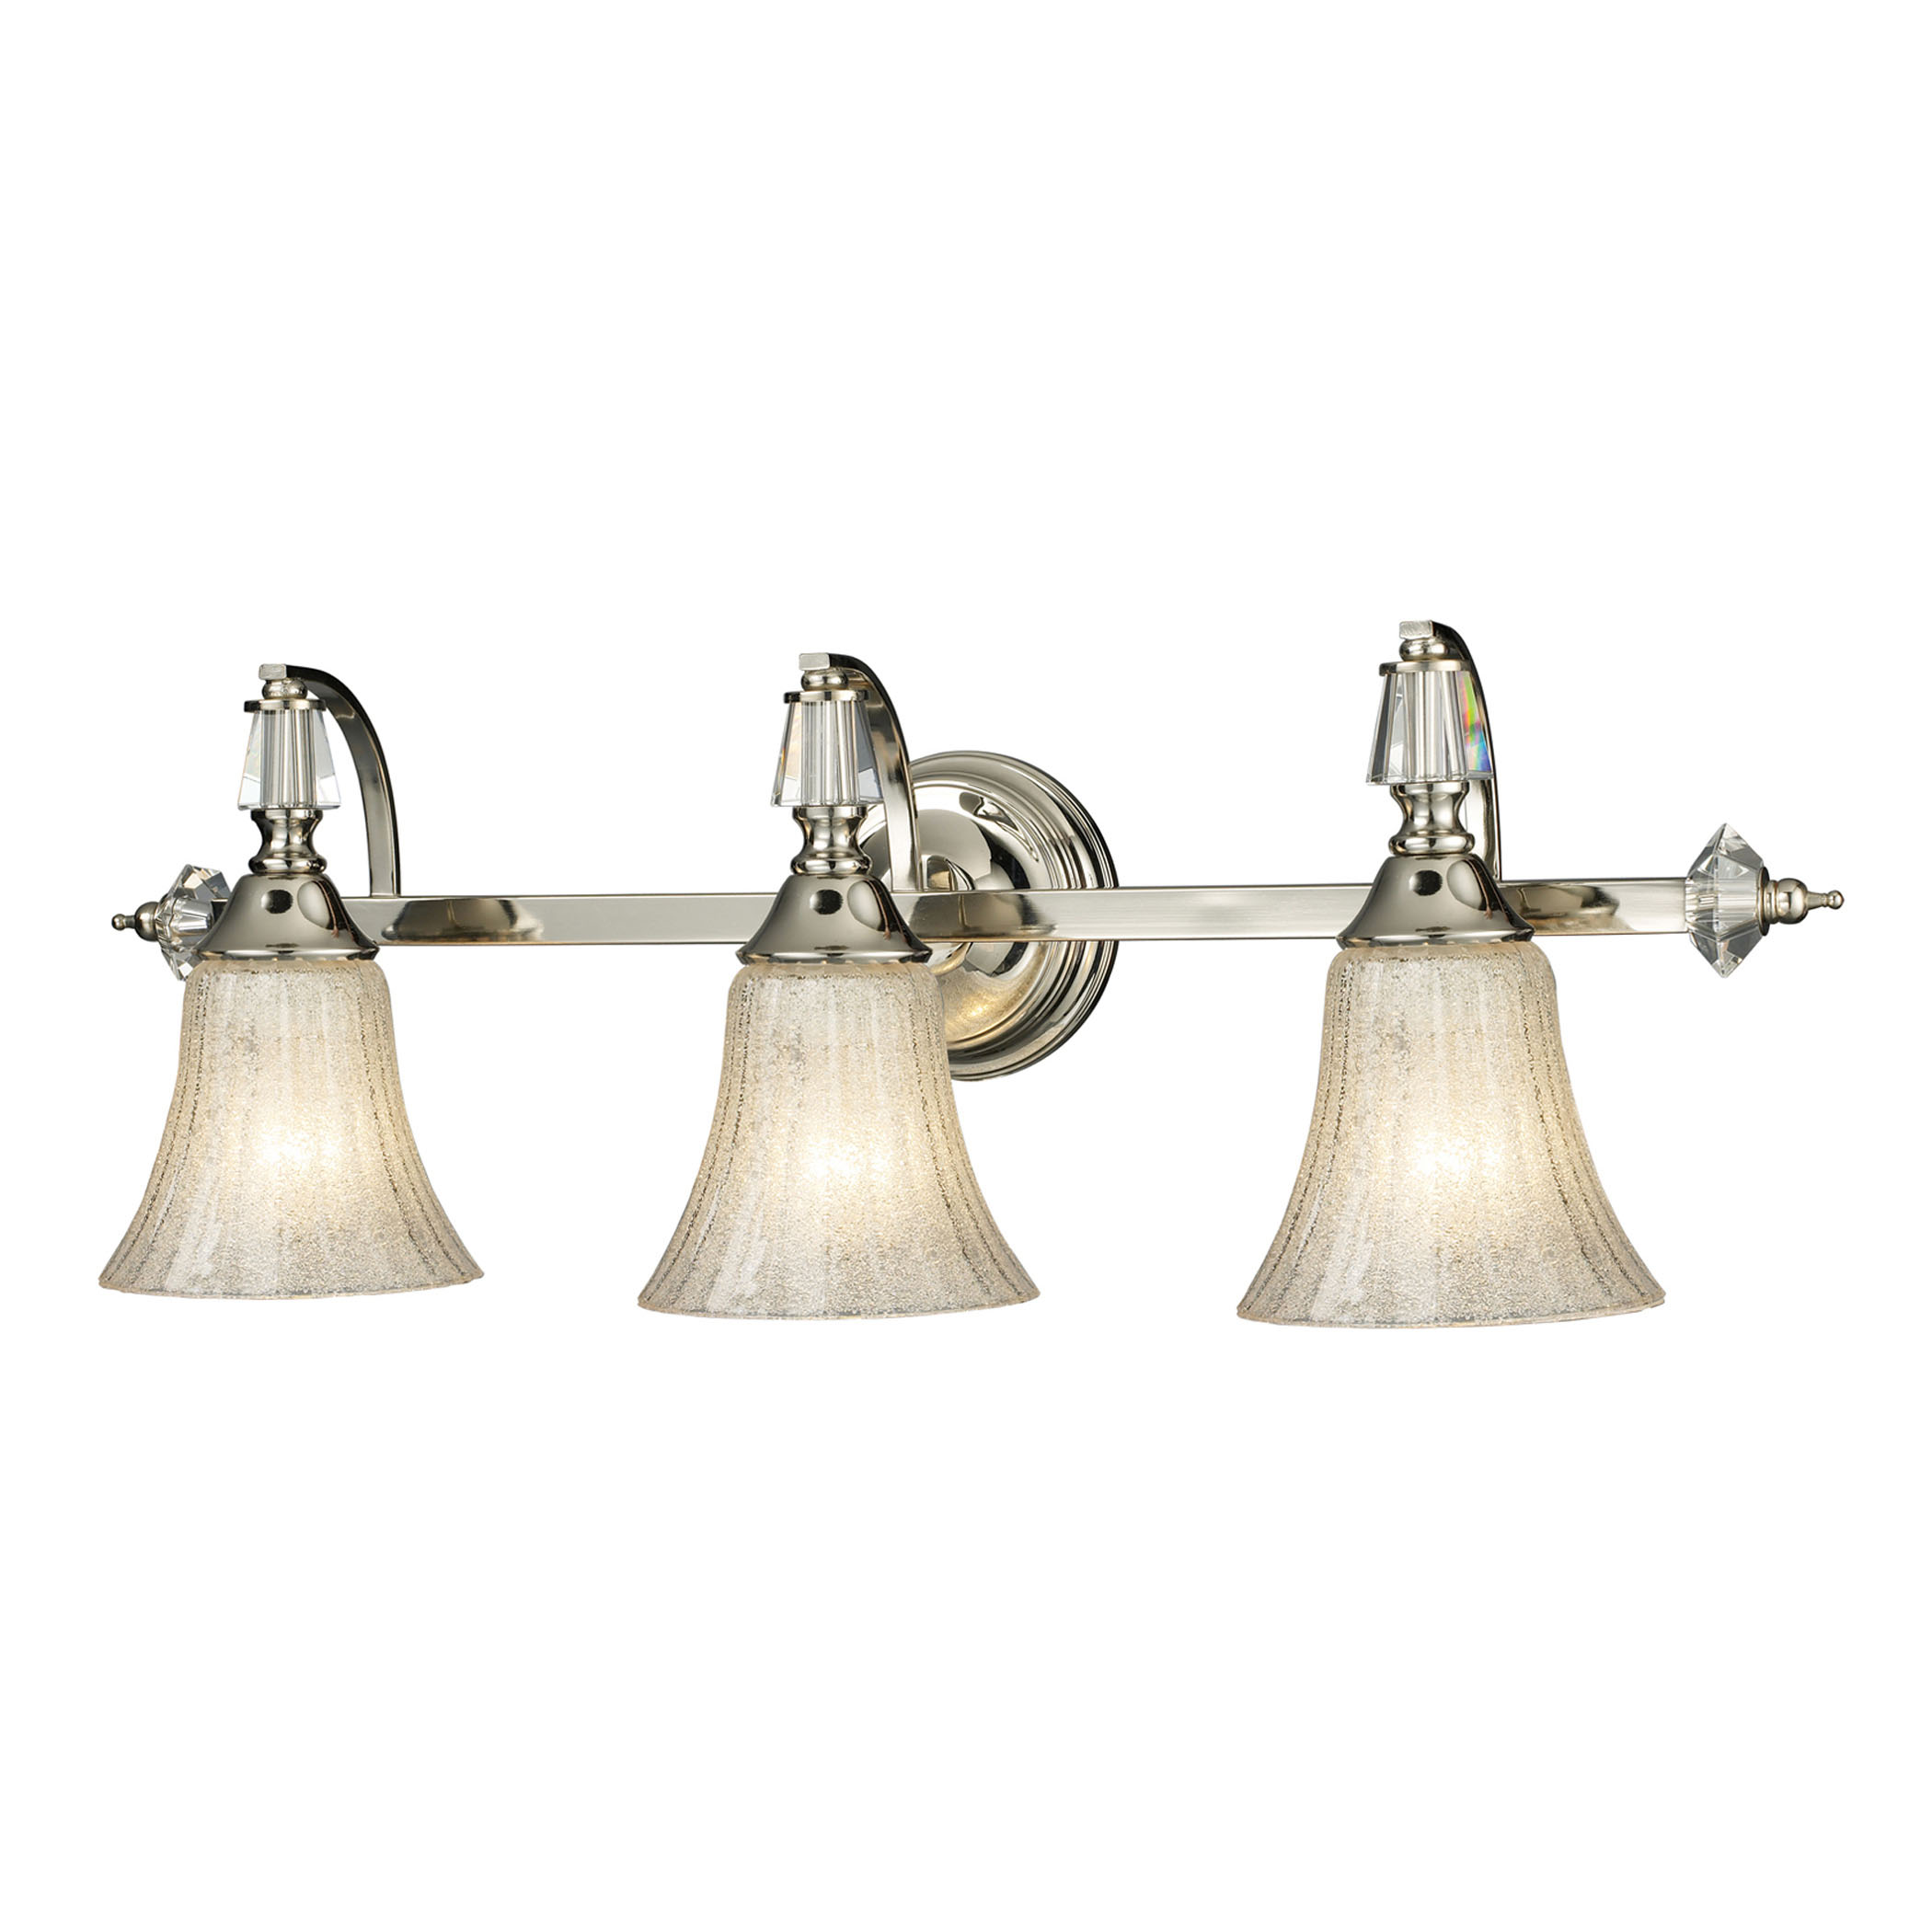 Lincoln Square 3-Light Bath Bar in Polished Nickel with Clear Crystalline Glass